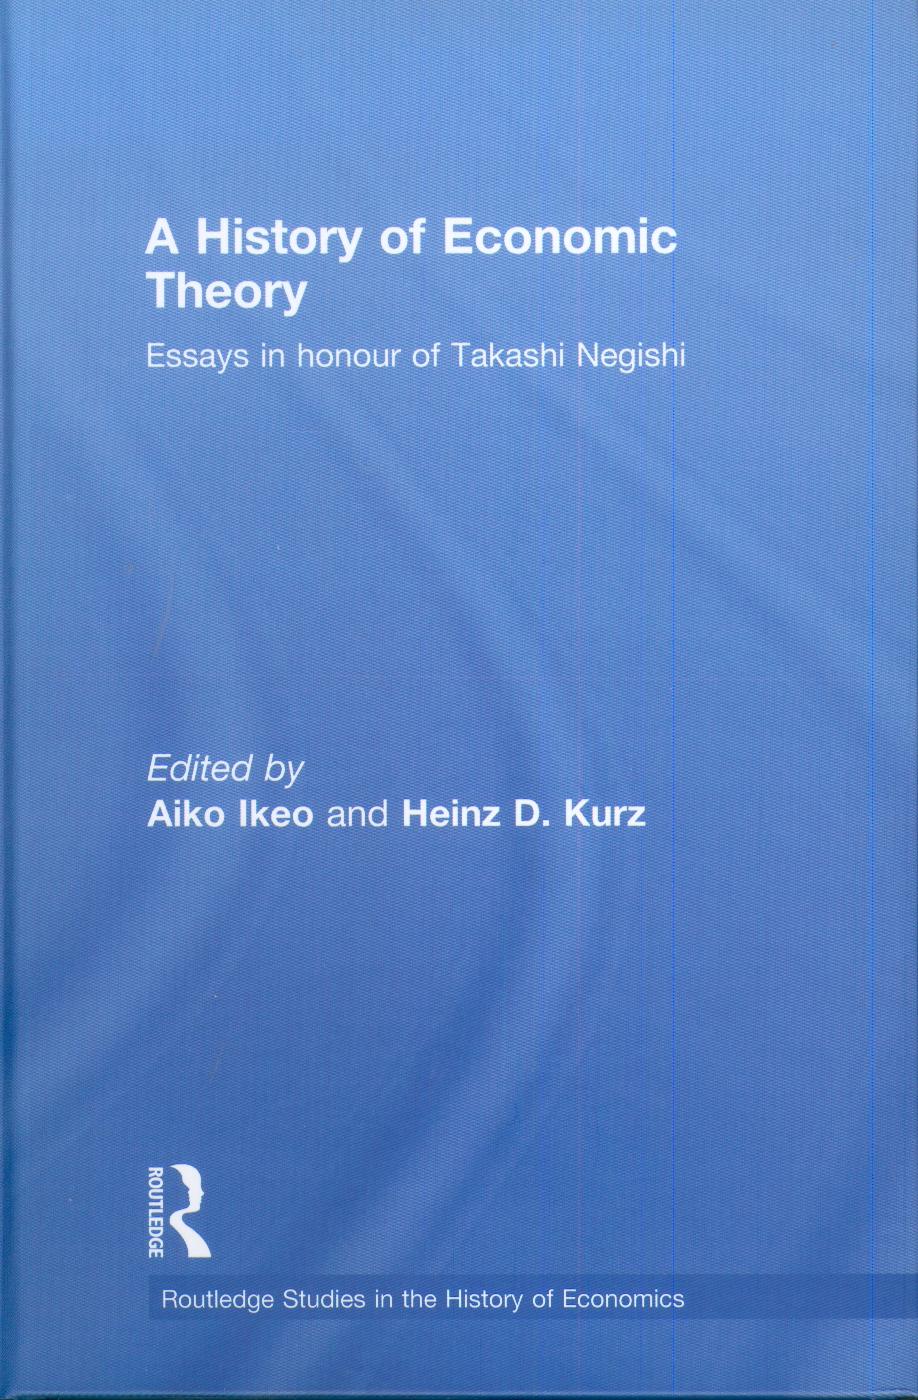 A History Of Economic Theory "Essays In Honour Of Takashi Negishi". Essays In Honour Of Takashi Negishi